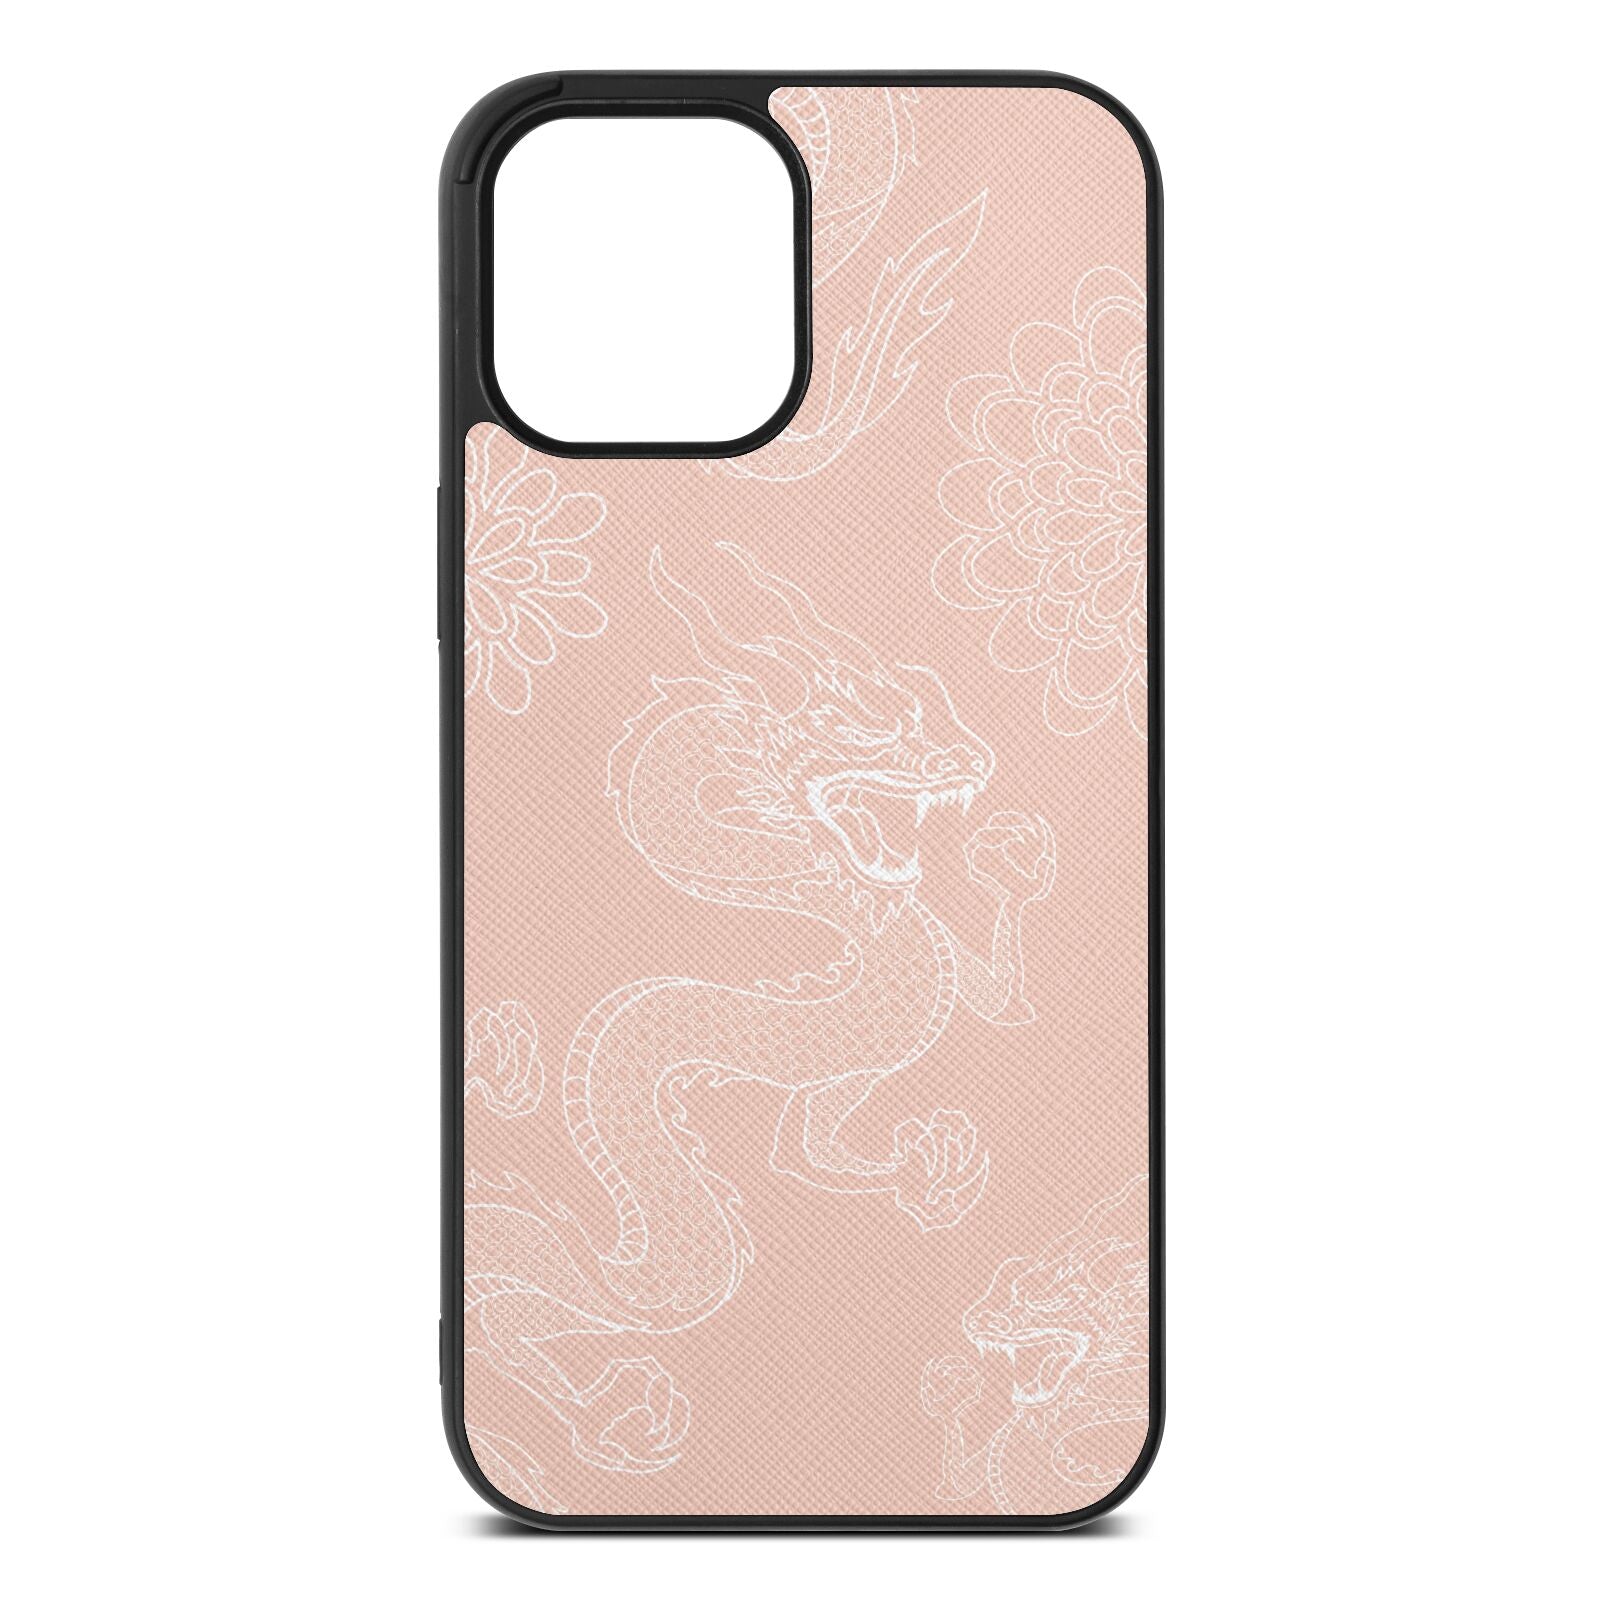 Dragons Nude Saffiano Leather iPhone 12 Pro Max Case